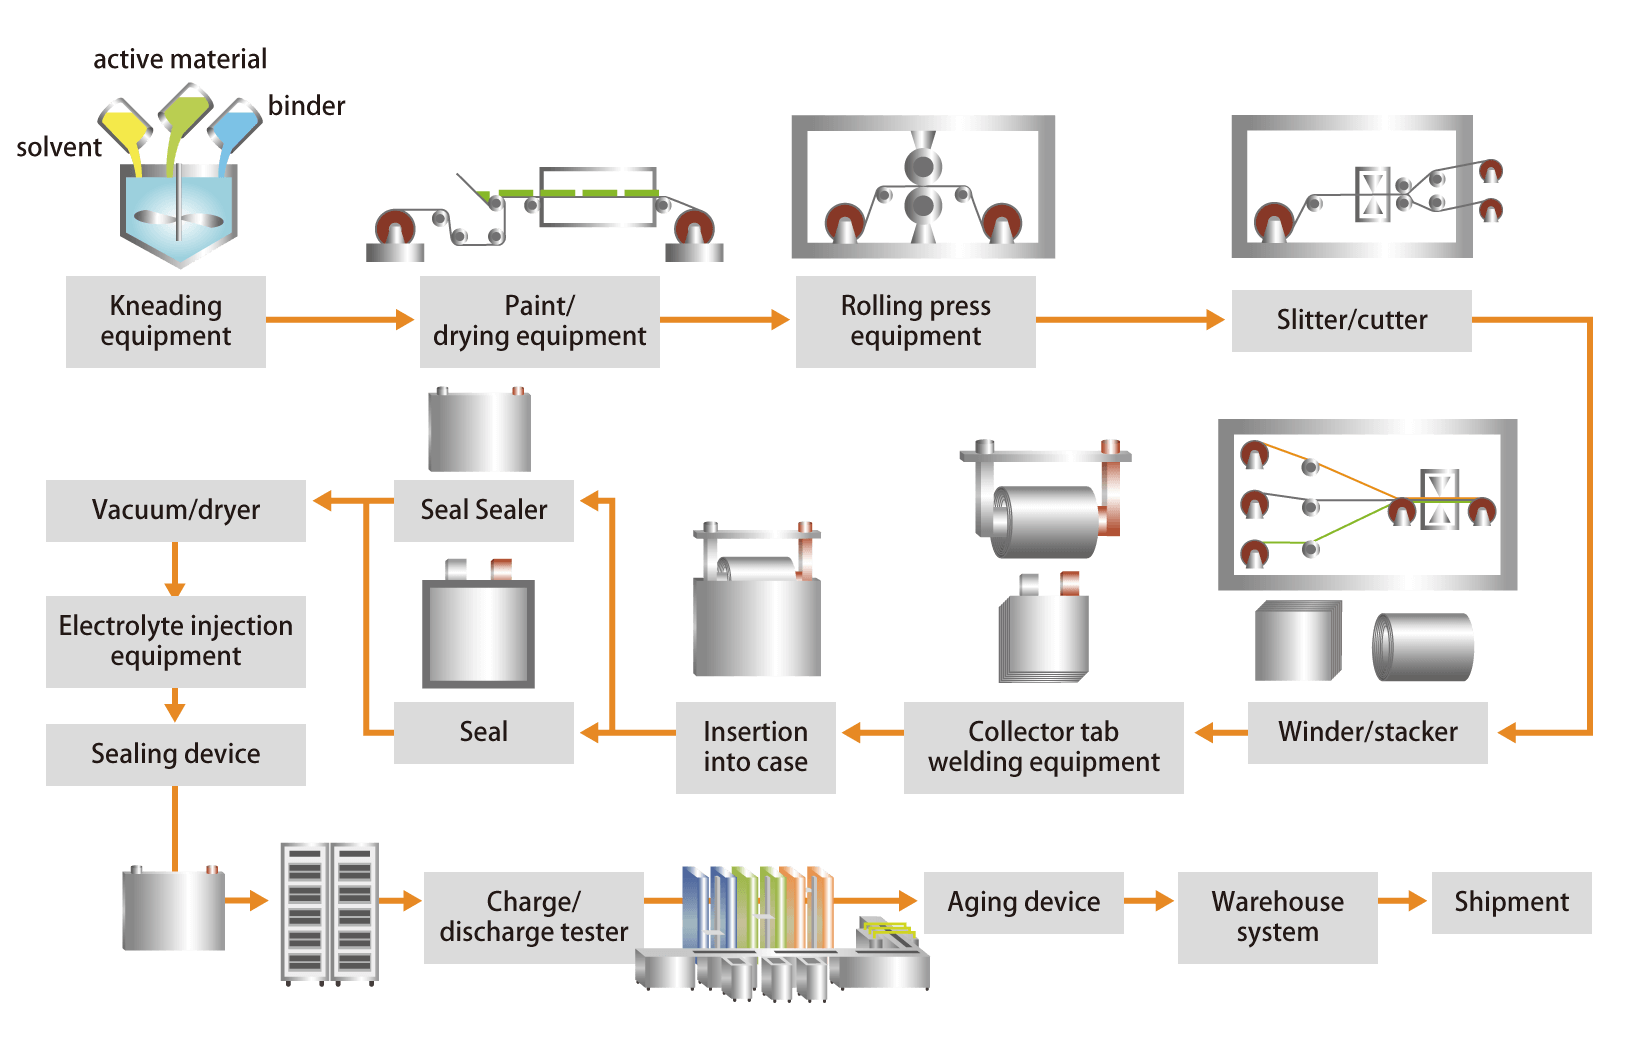 Process of equipment for prototype/pilot and mass production